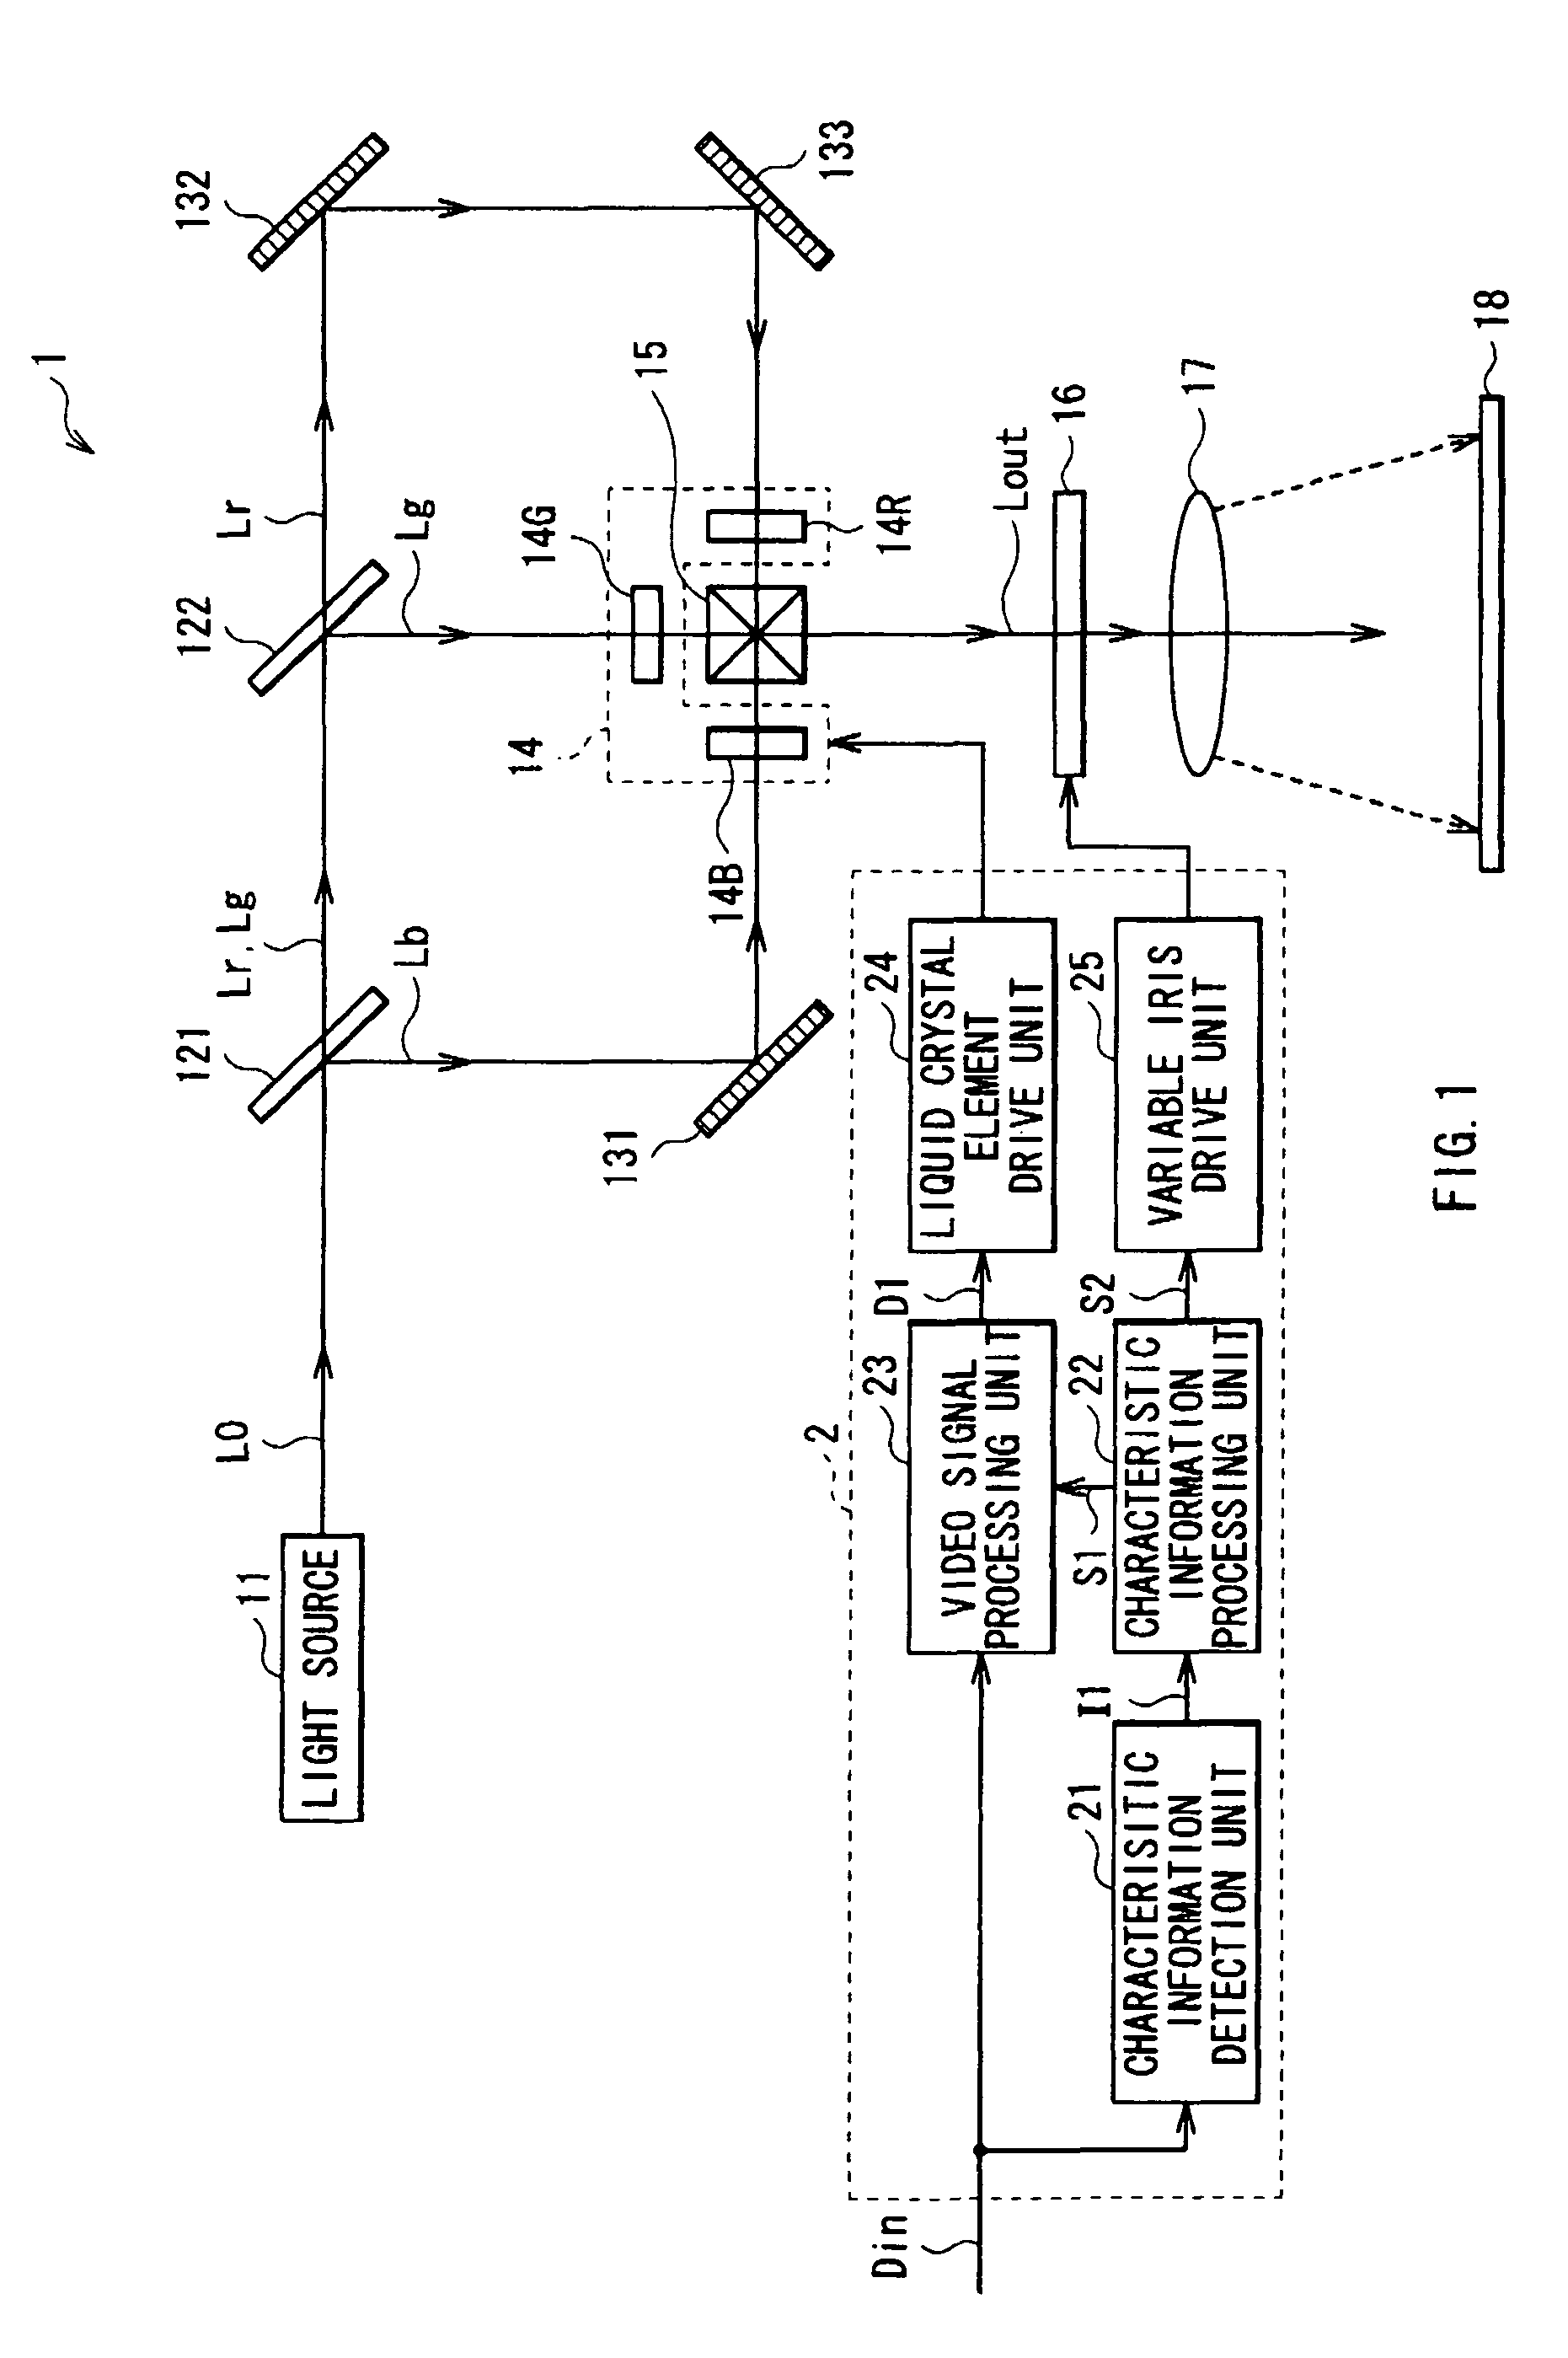 Image display apparatus featuring improved contrast